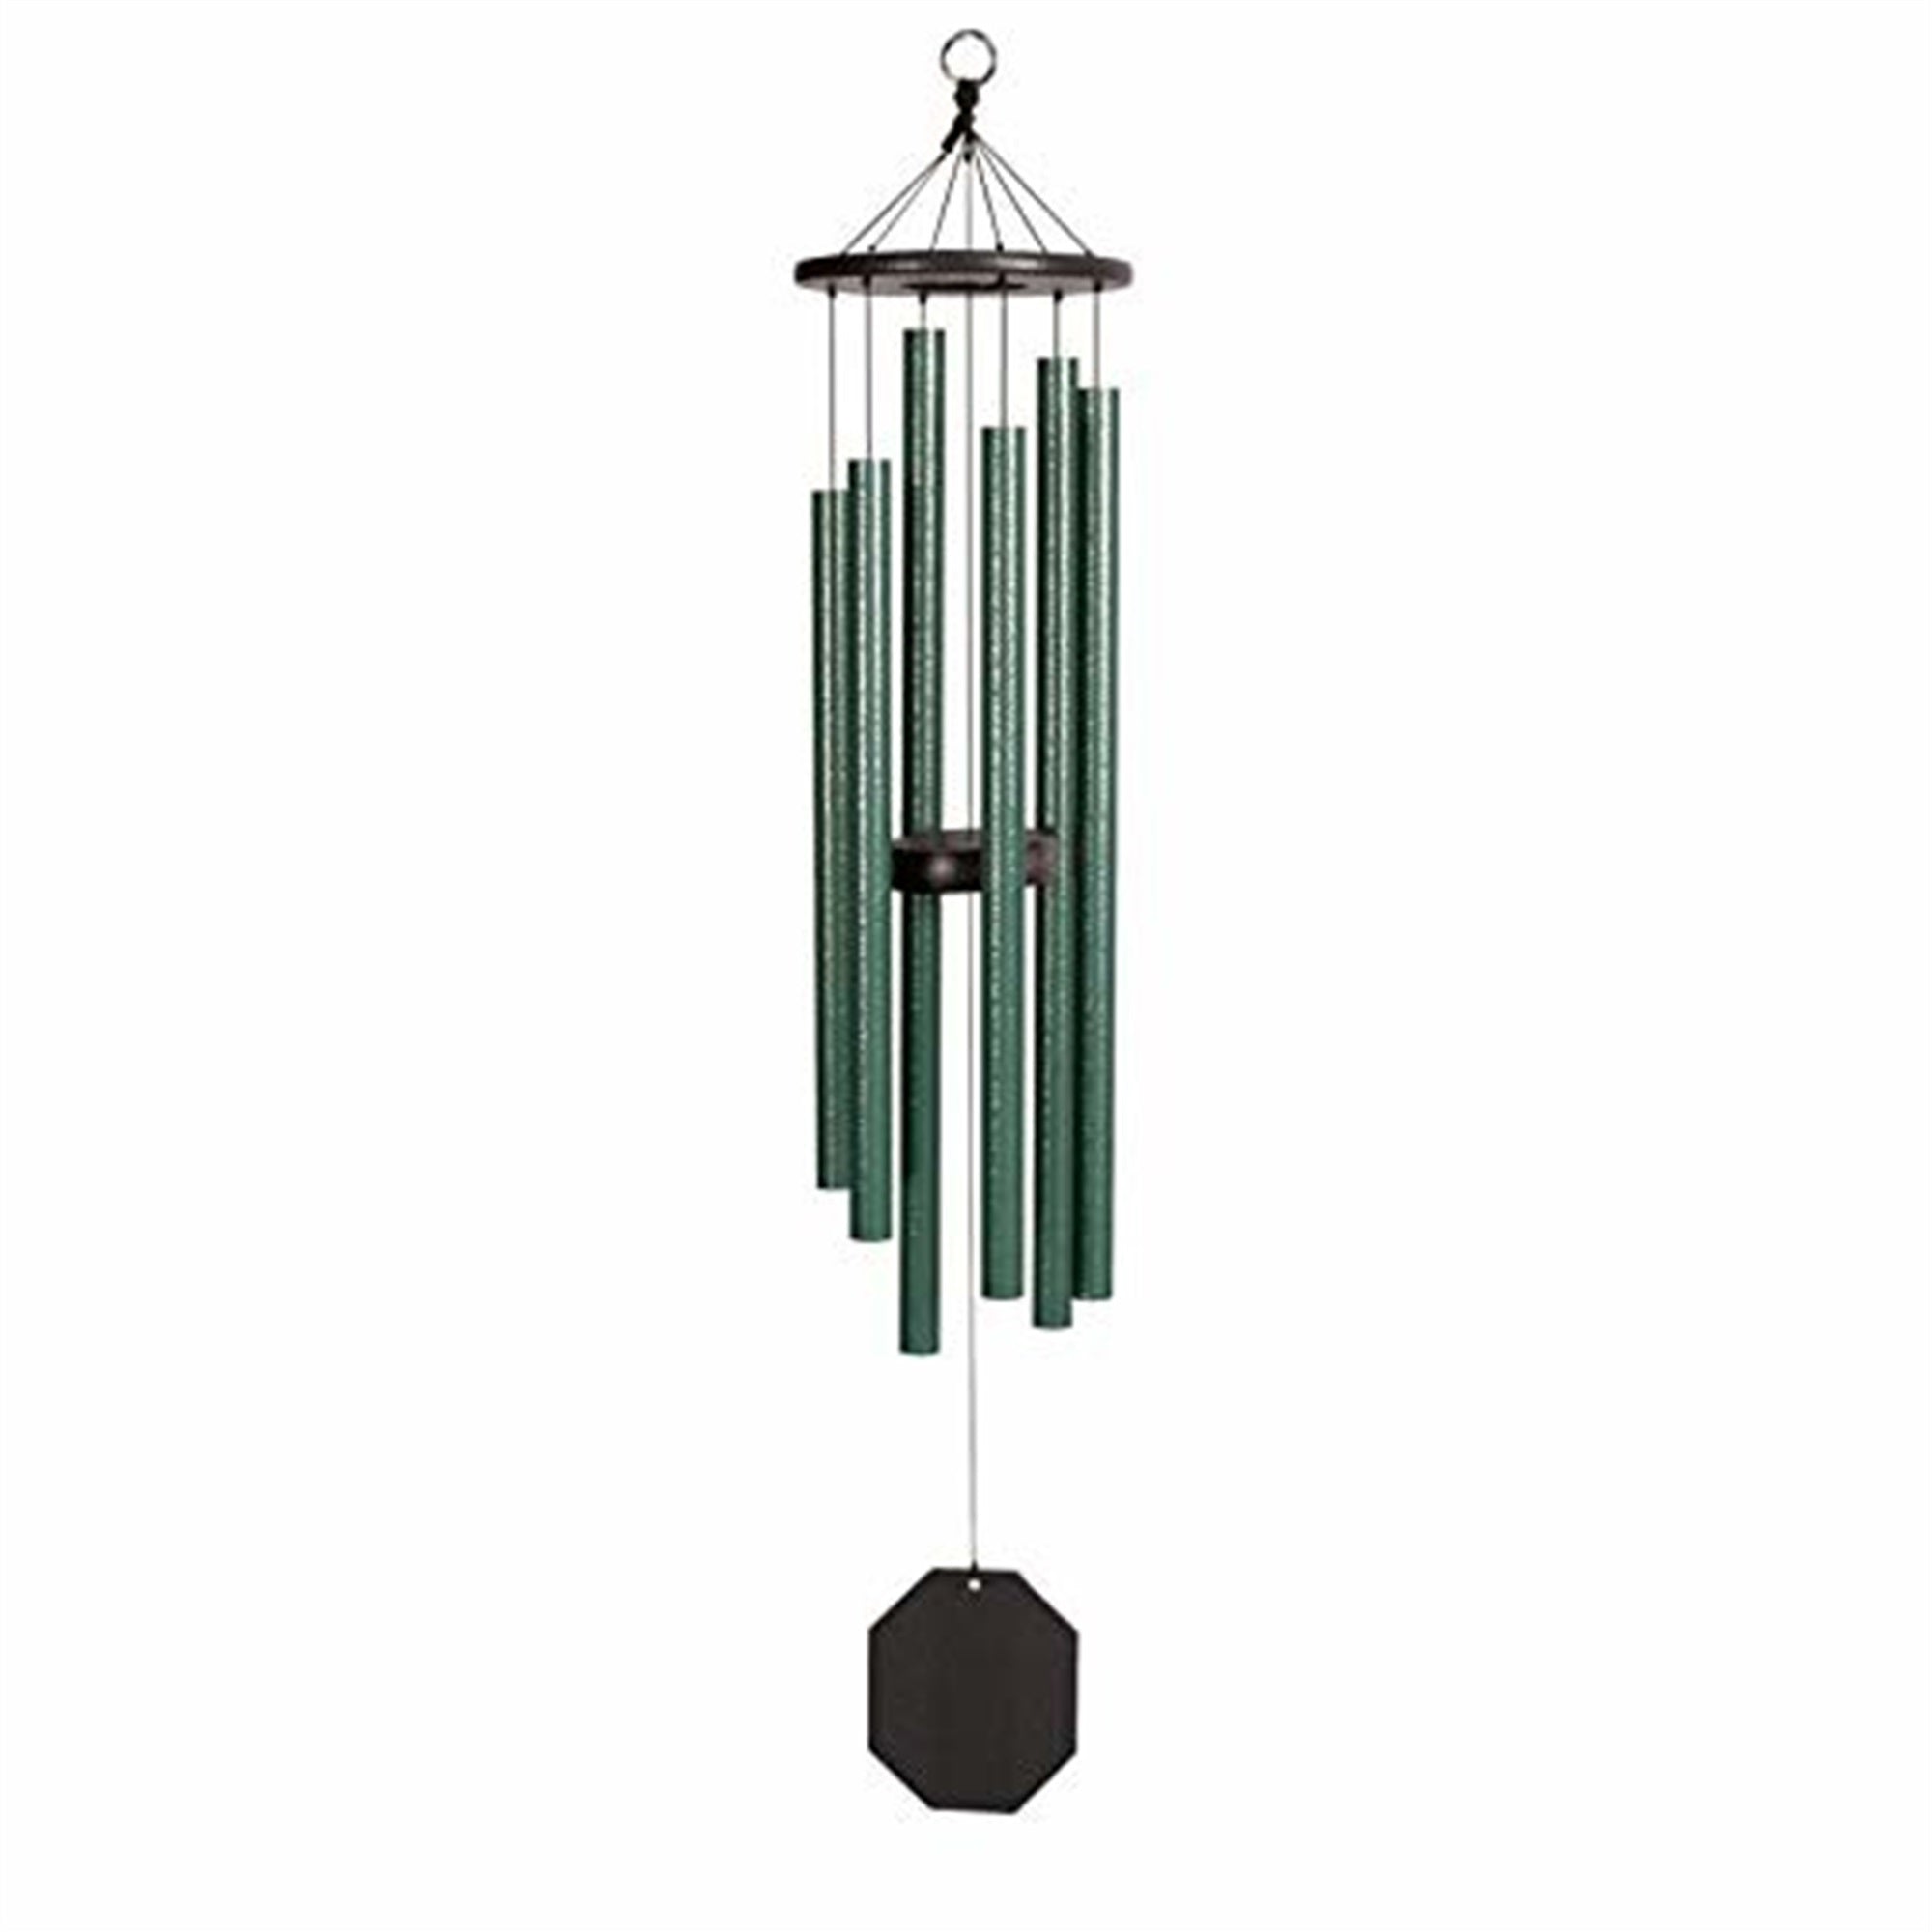 Lambright Country Chimes (#513) Amish Crafted Tranquil Rain Wind Chime, 41"